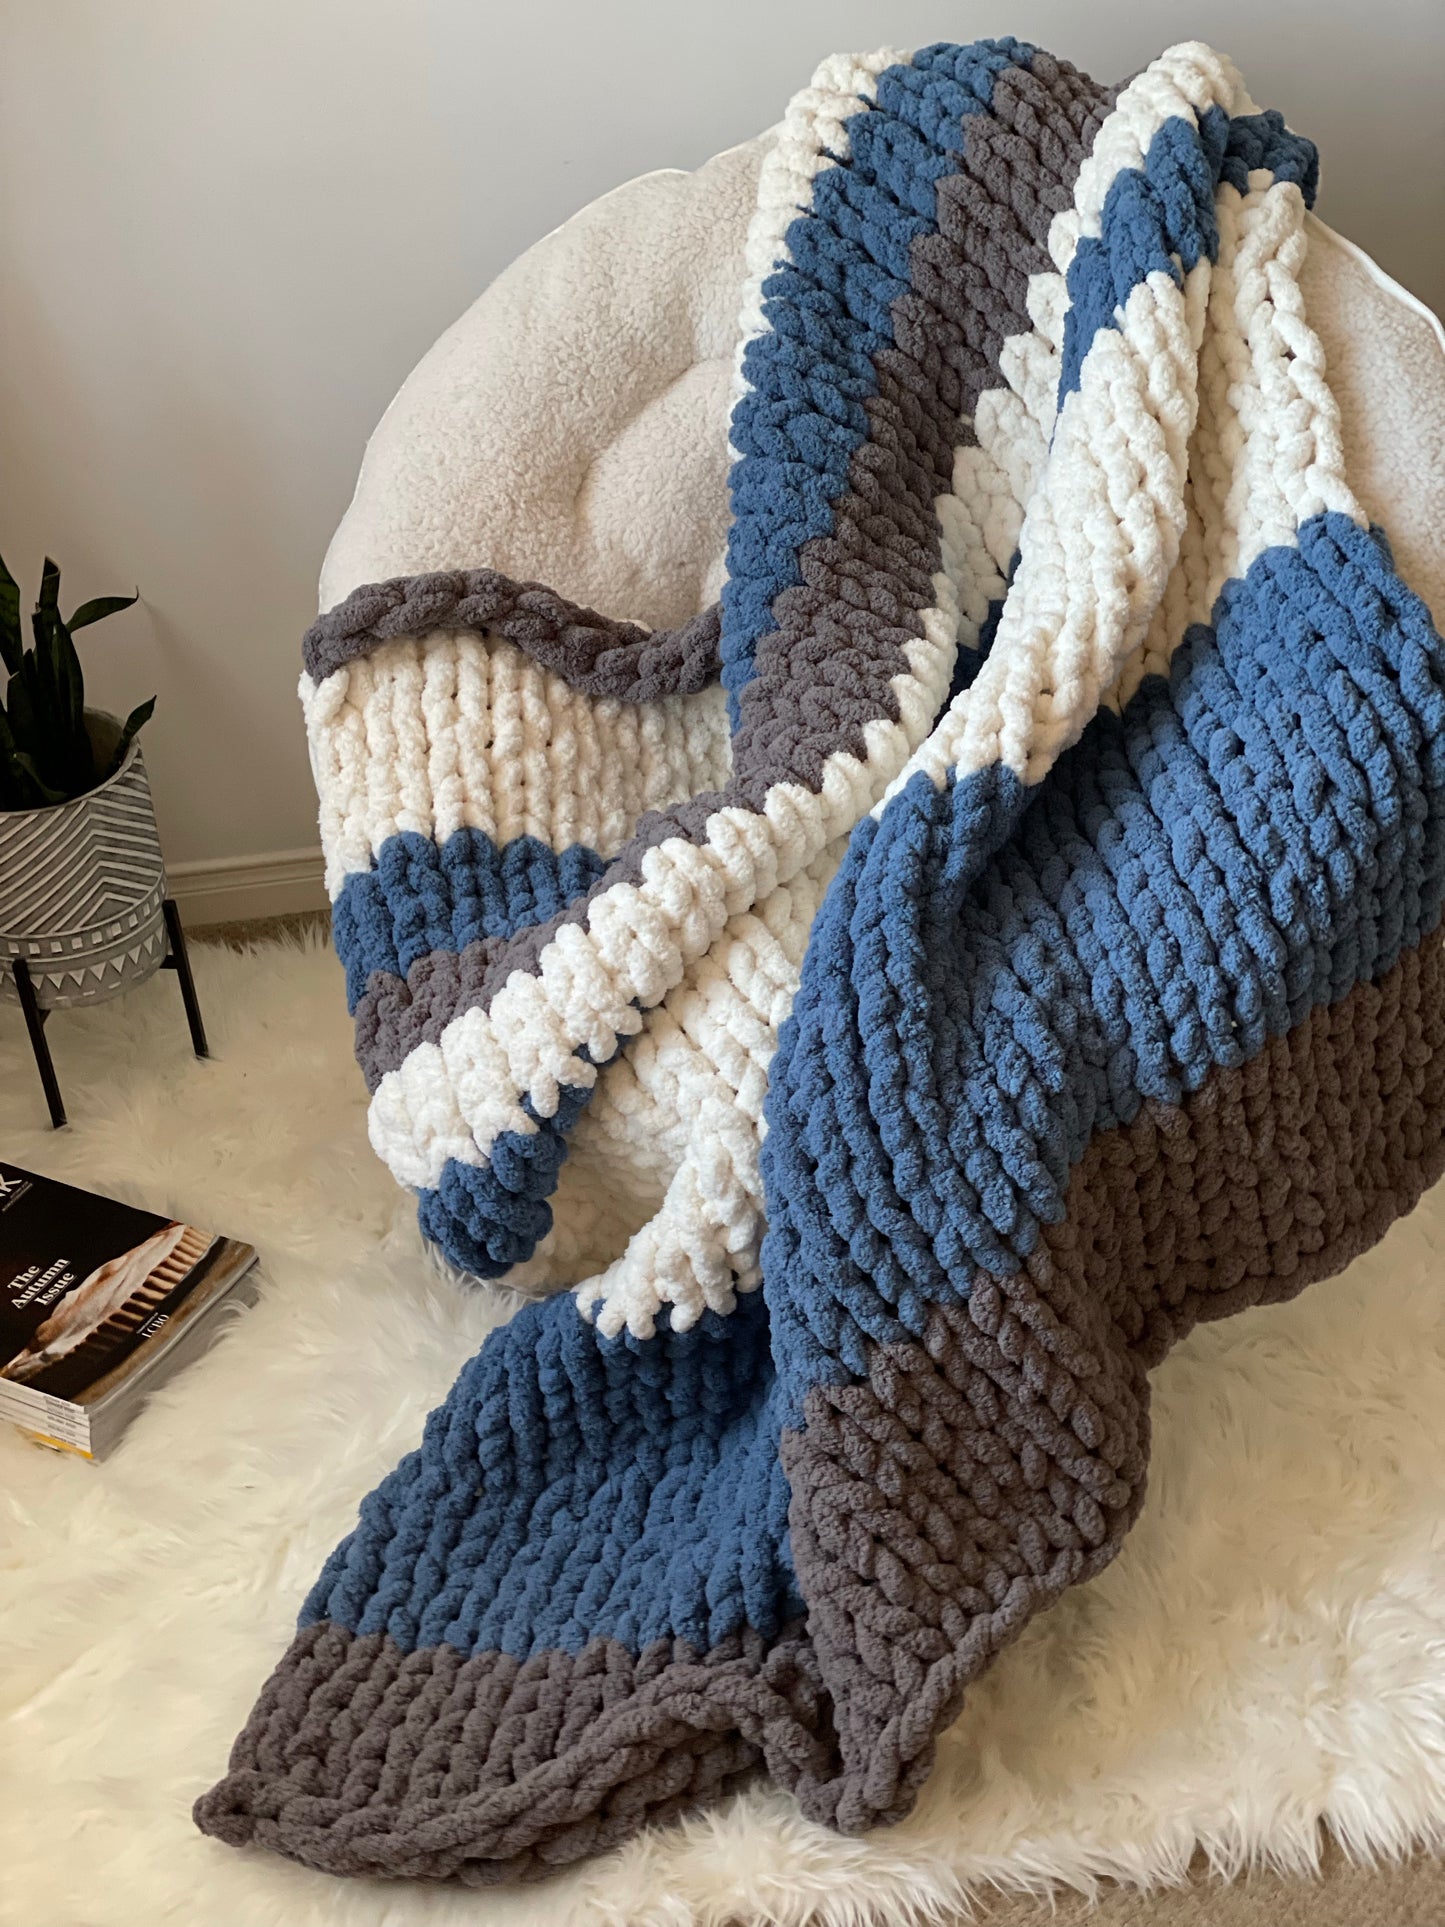 Healing Hand, Chunky Knit Blankets “The Pablo”